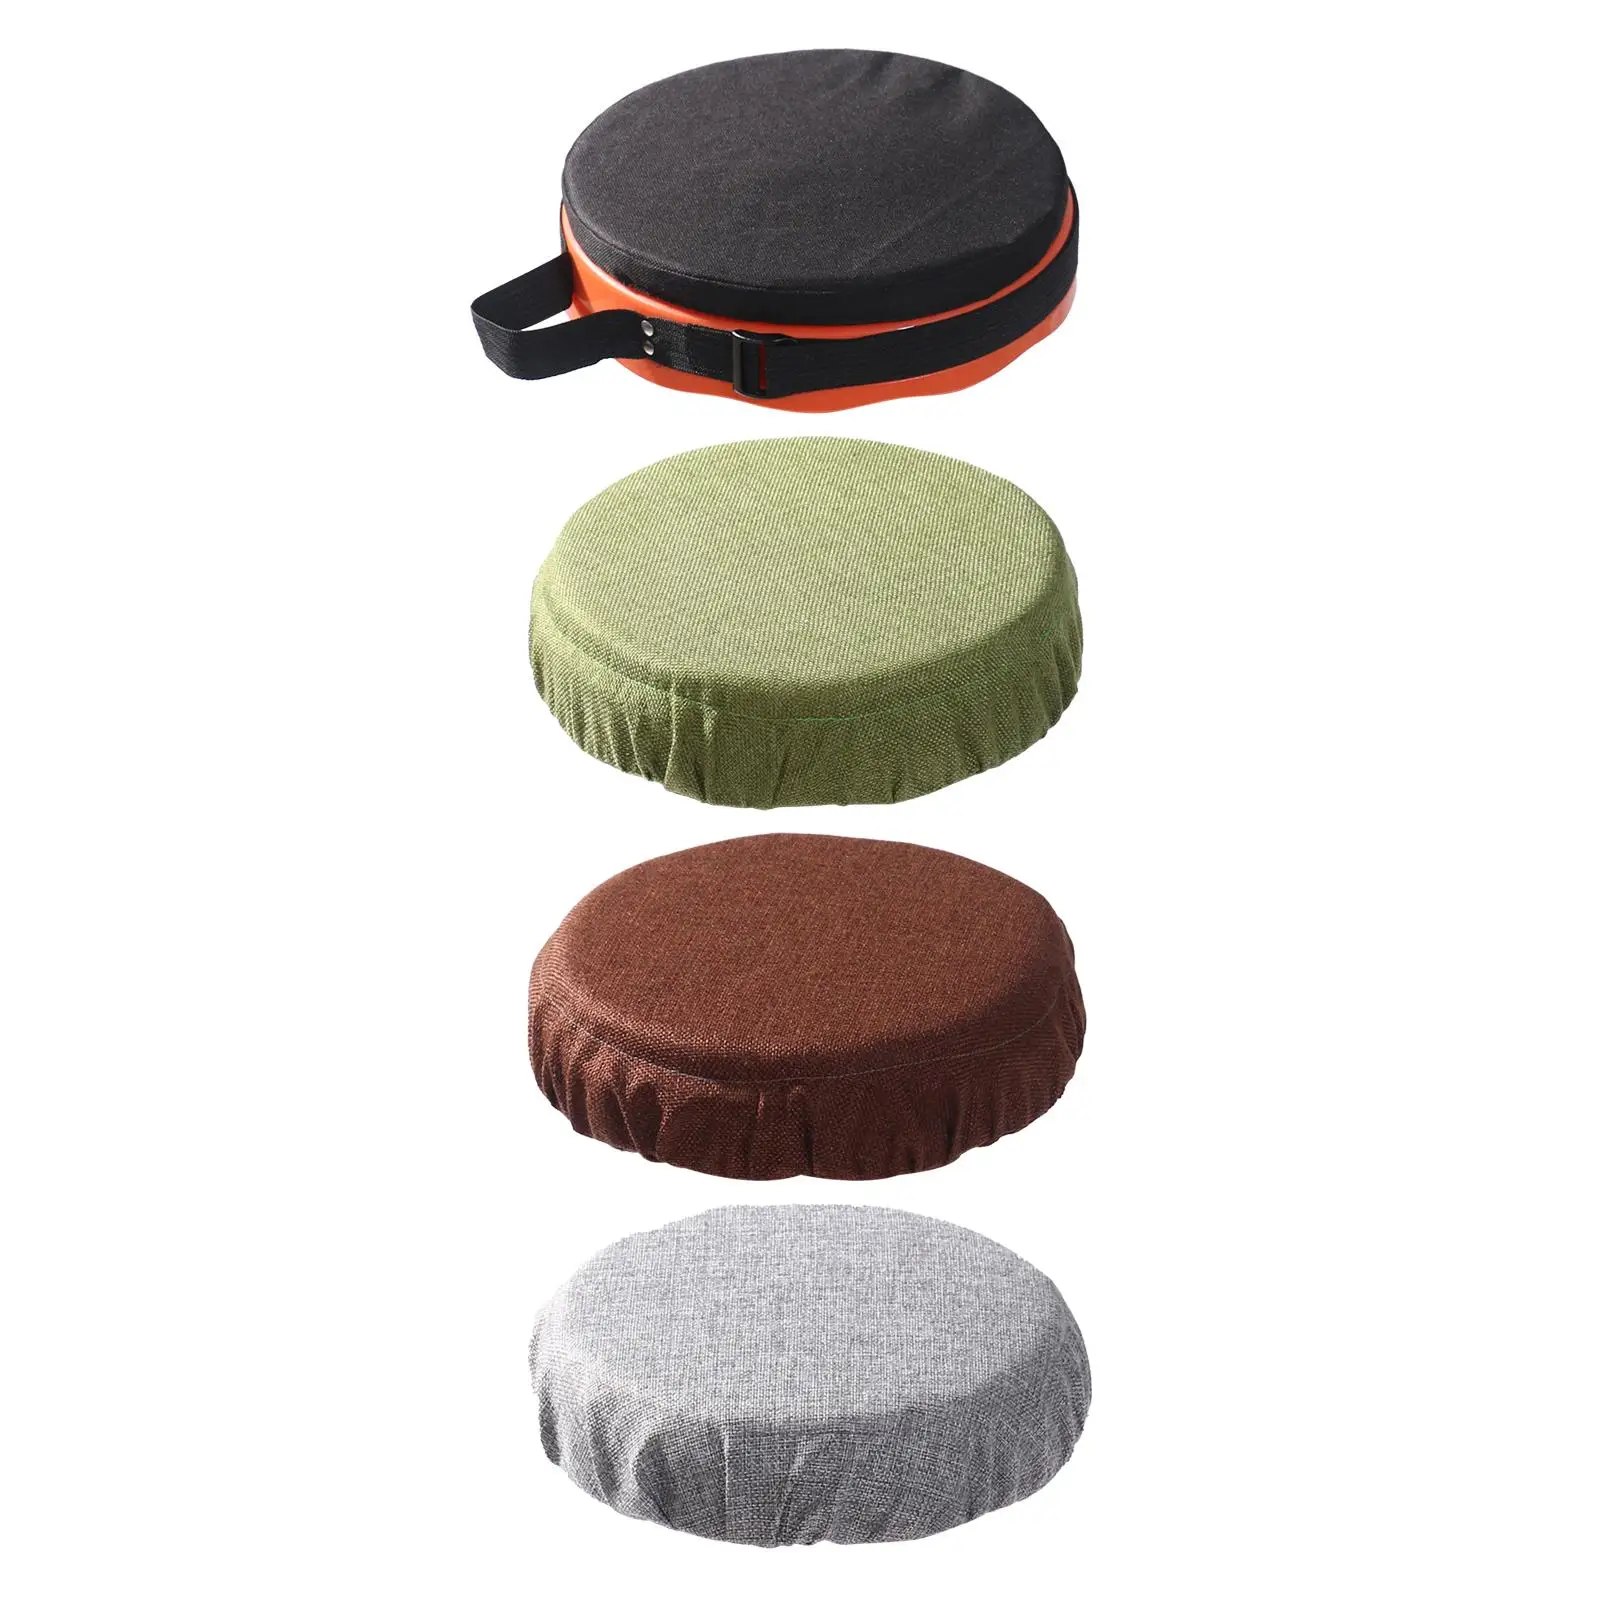 Seat Cushion for Chair Living Room Office Stadium Indoor Outdoor Collapsible Stool Cushion for Travel BBQ Party Lawn Backpacking